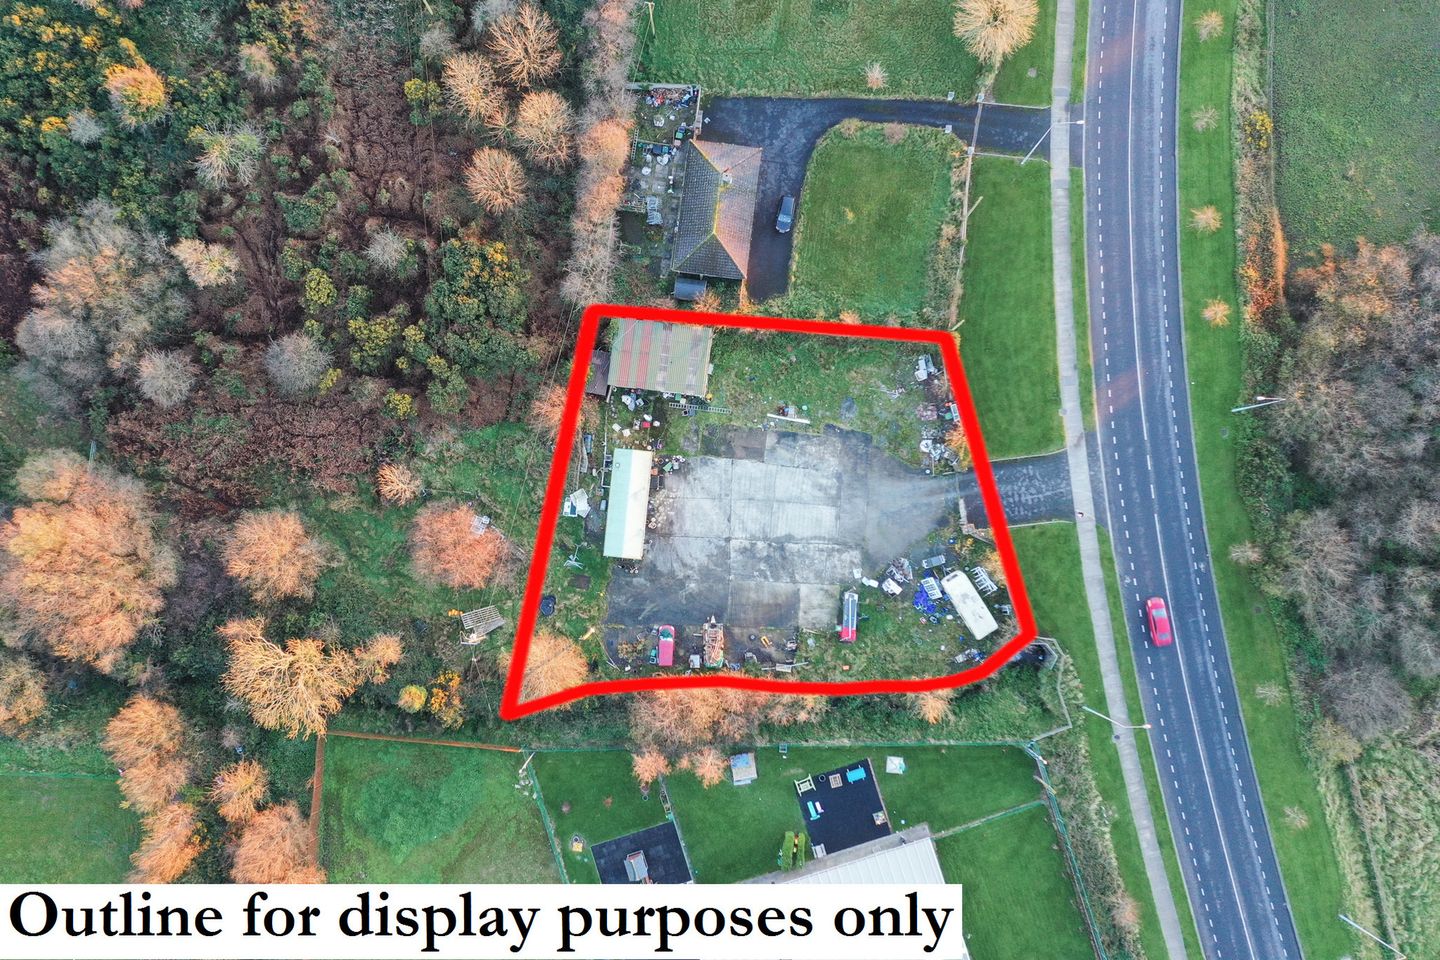 0.37 Acre Site At Couse, Kilcohan, Old Tramore Road, Waterford, Waterford City, Co. Waterford, X91F6DX